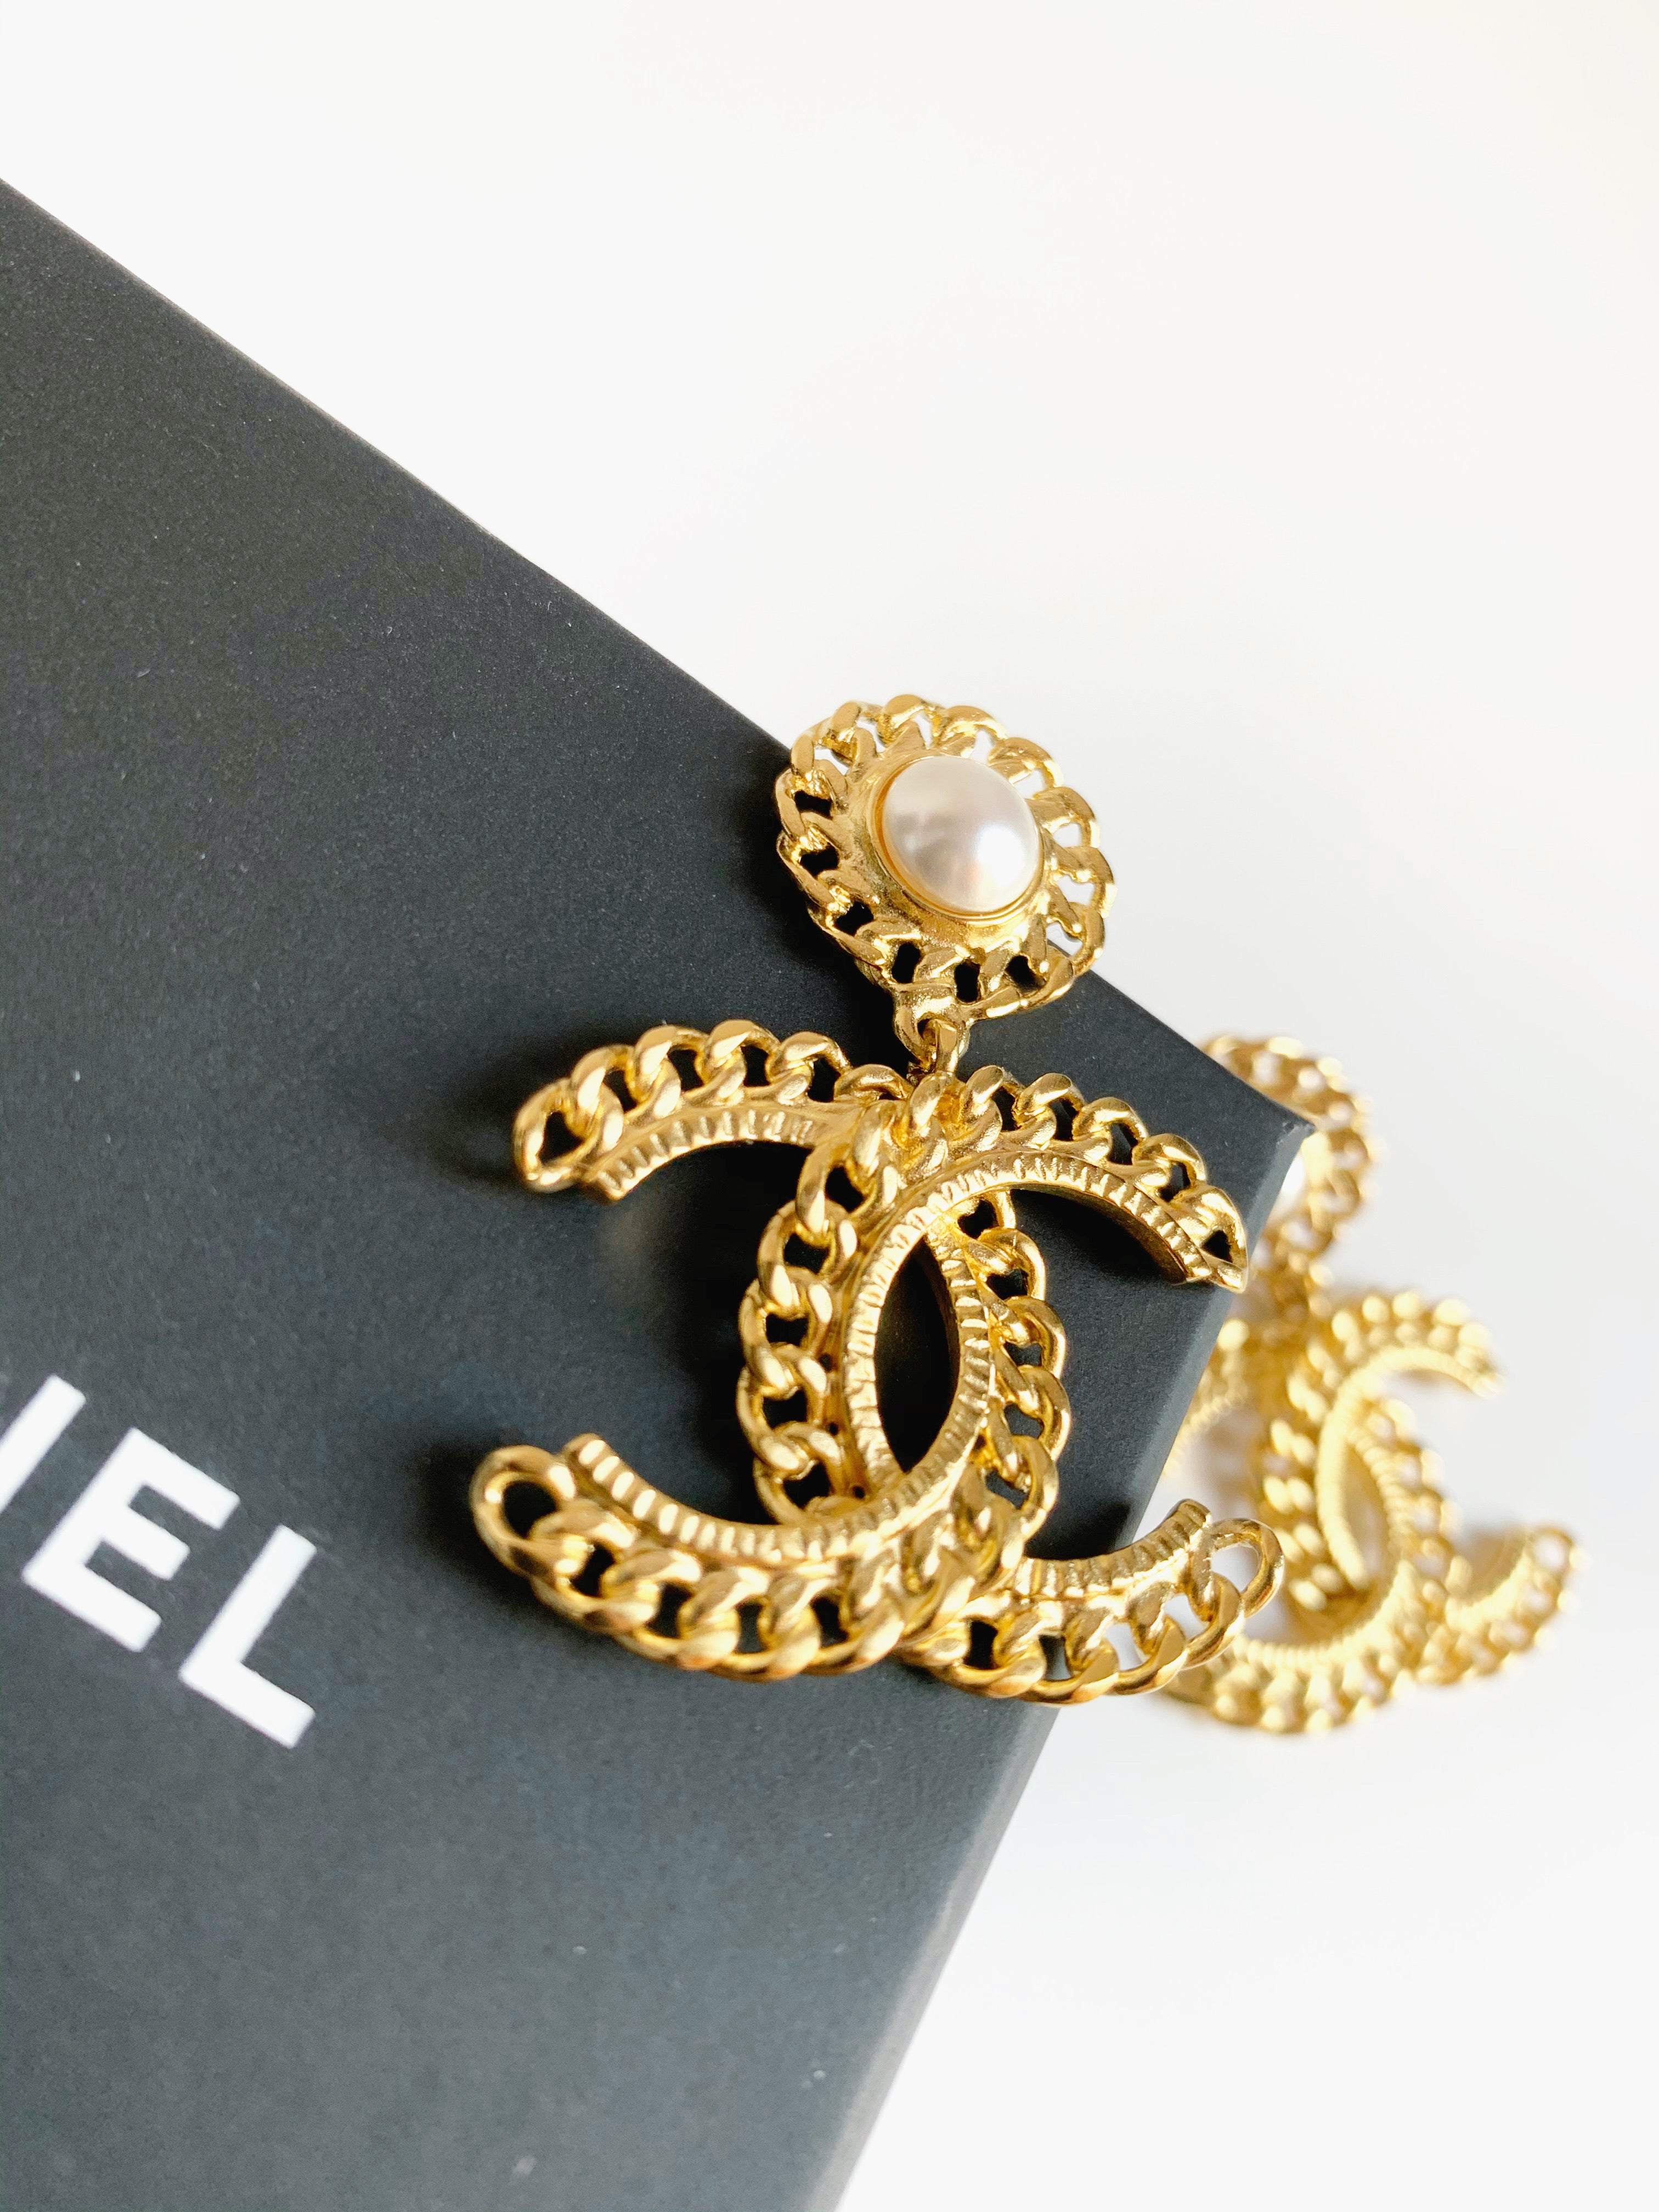 chanel earrings with pearl price